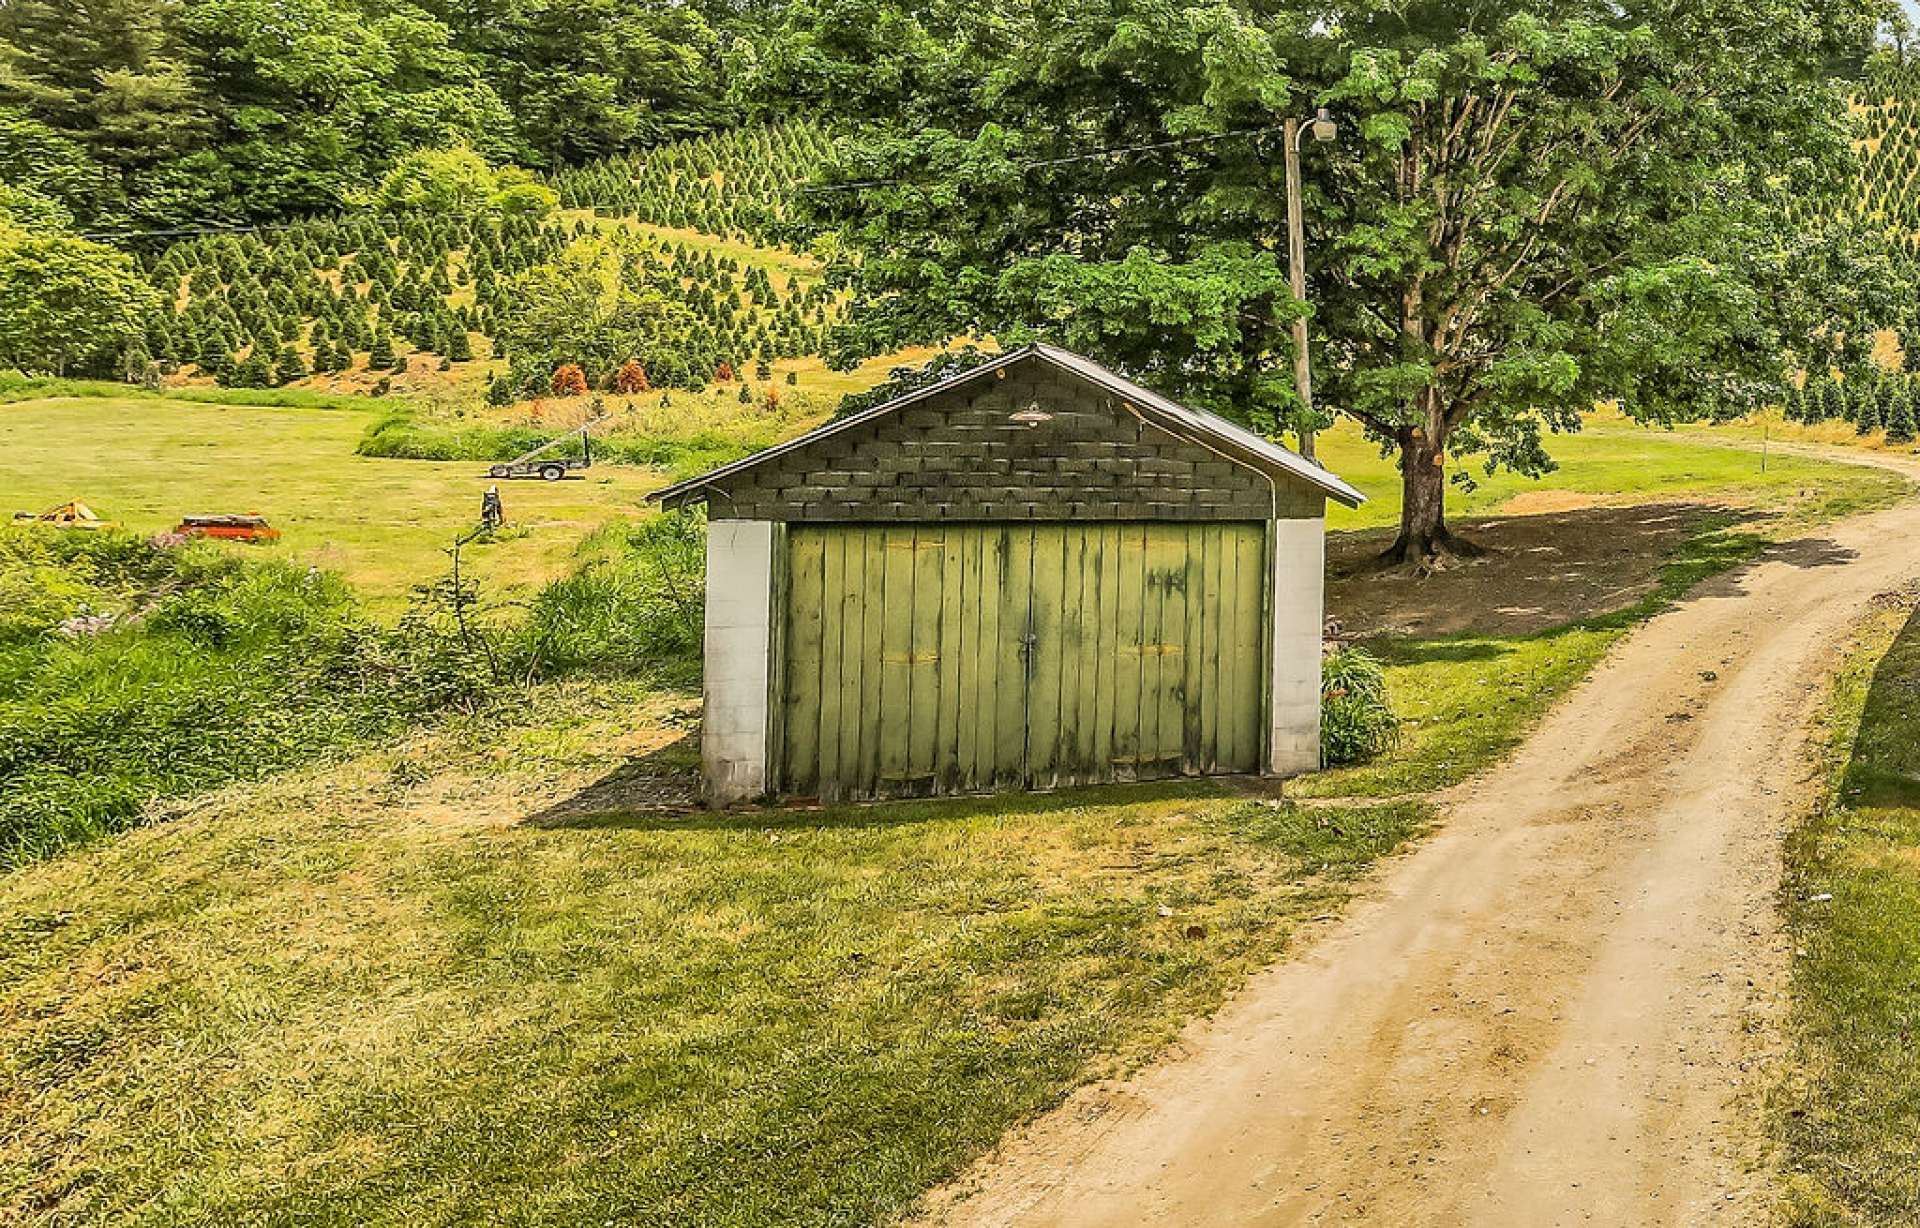 Outbuilding could be used as a one car garage, equipment storage, or a workshop.